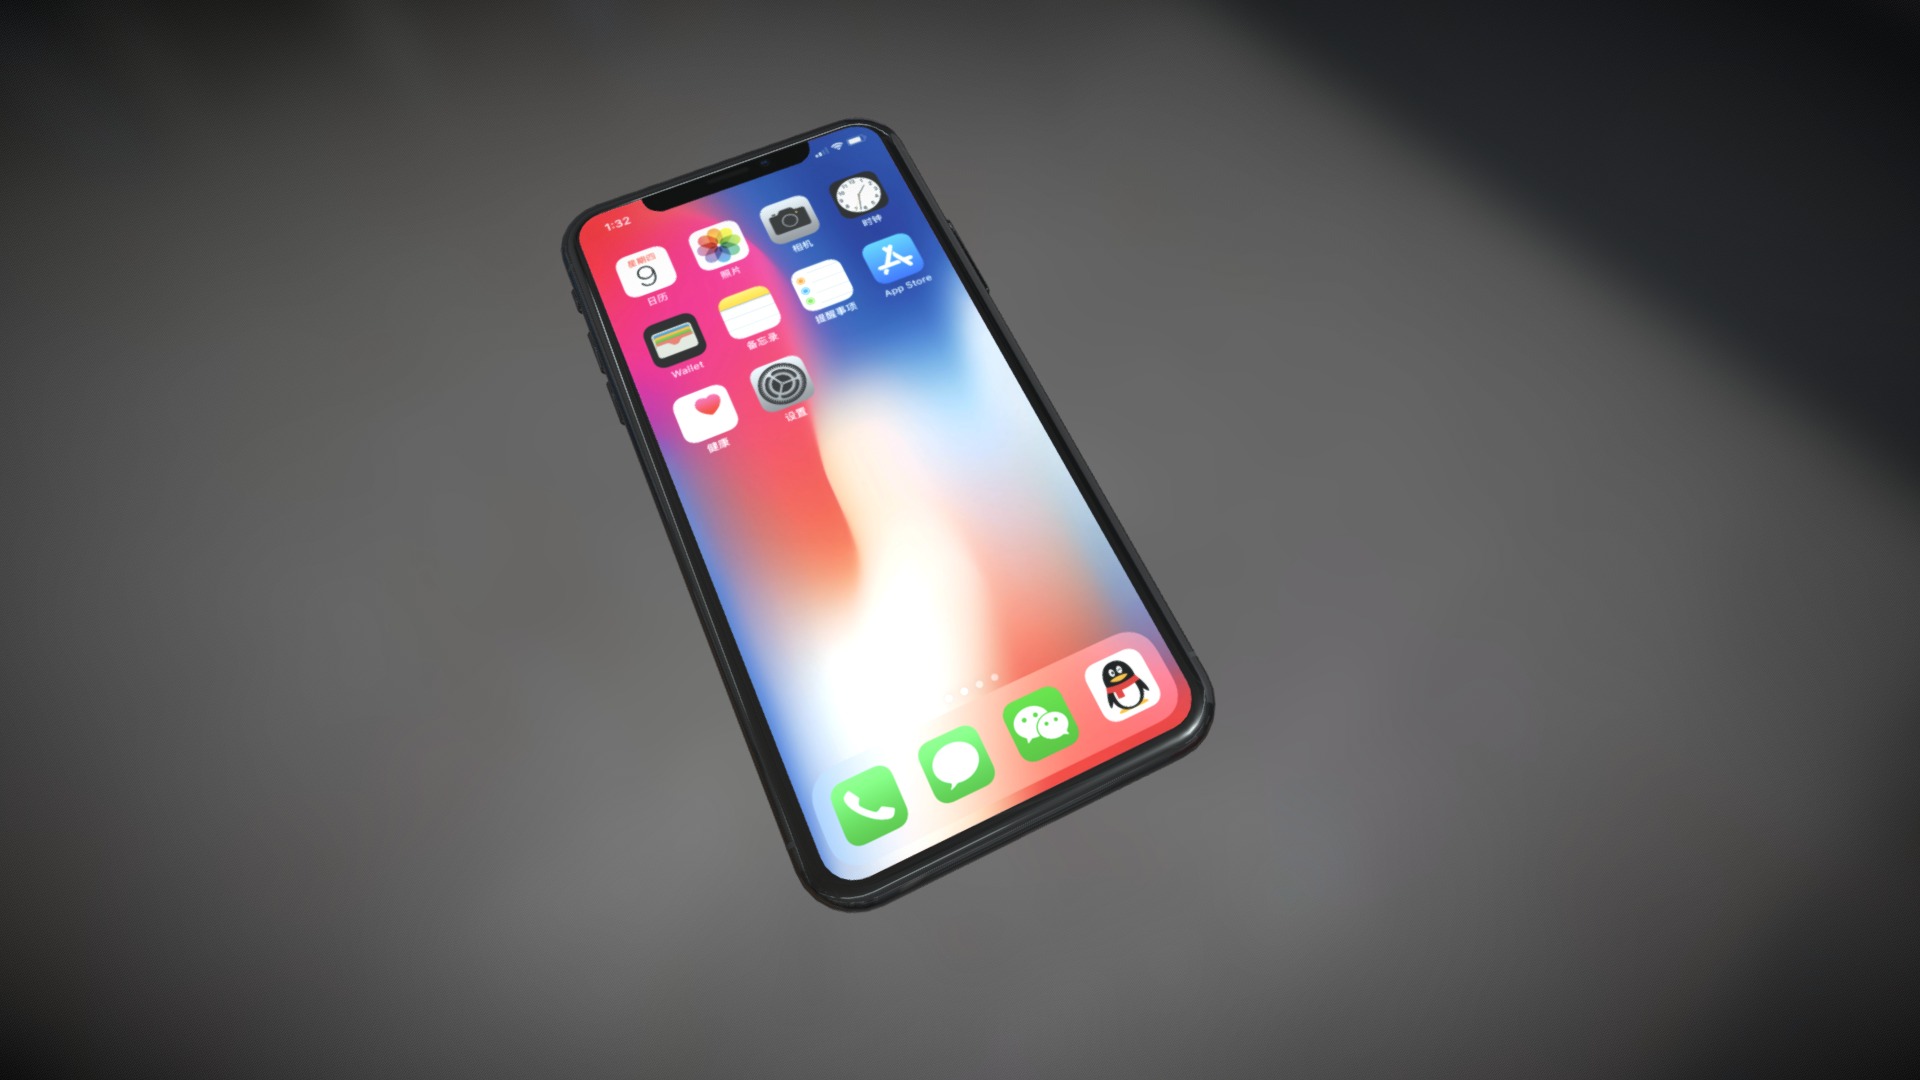 3D model Iphone X - This is a 3D model of the Iphone X. The 3D model is about a cell phone with a cracked screen.